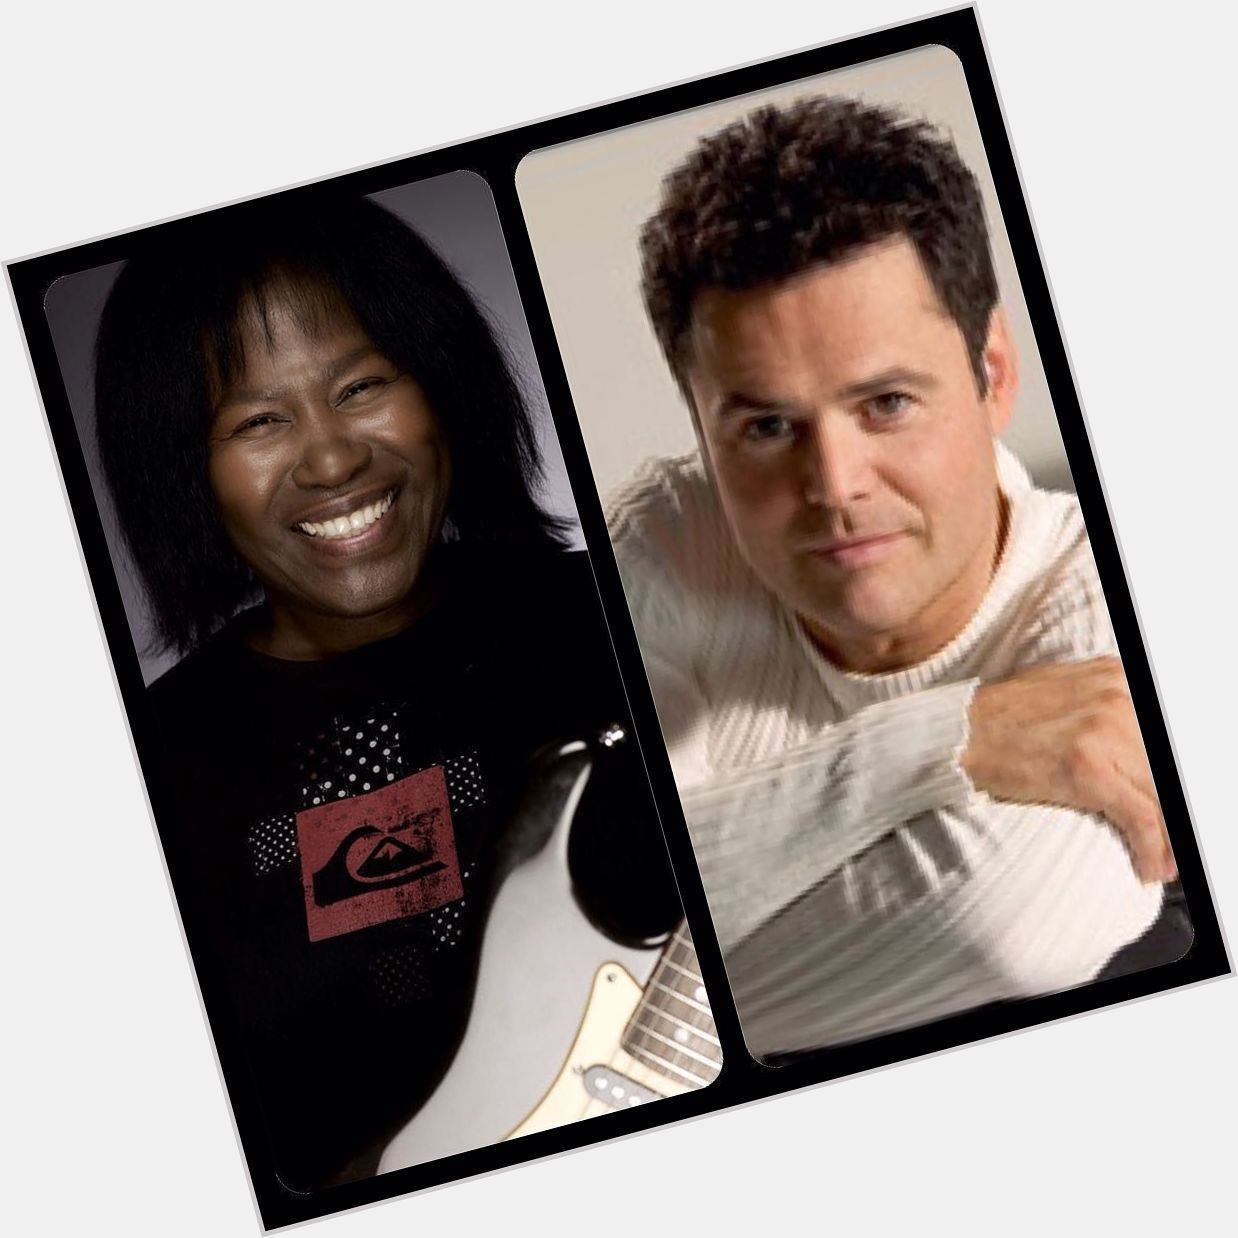  :  | And a happy birthday to
Joan Armatrading and
Donny Osmond
9Dec            